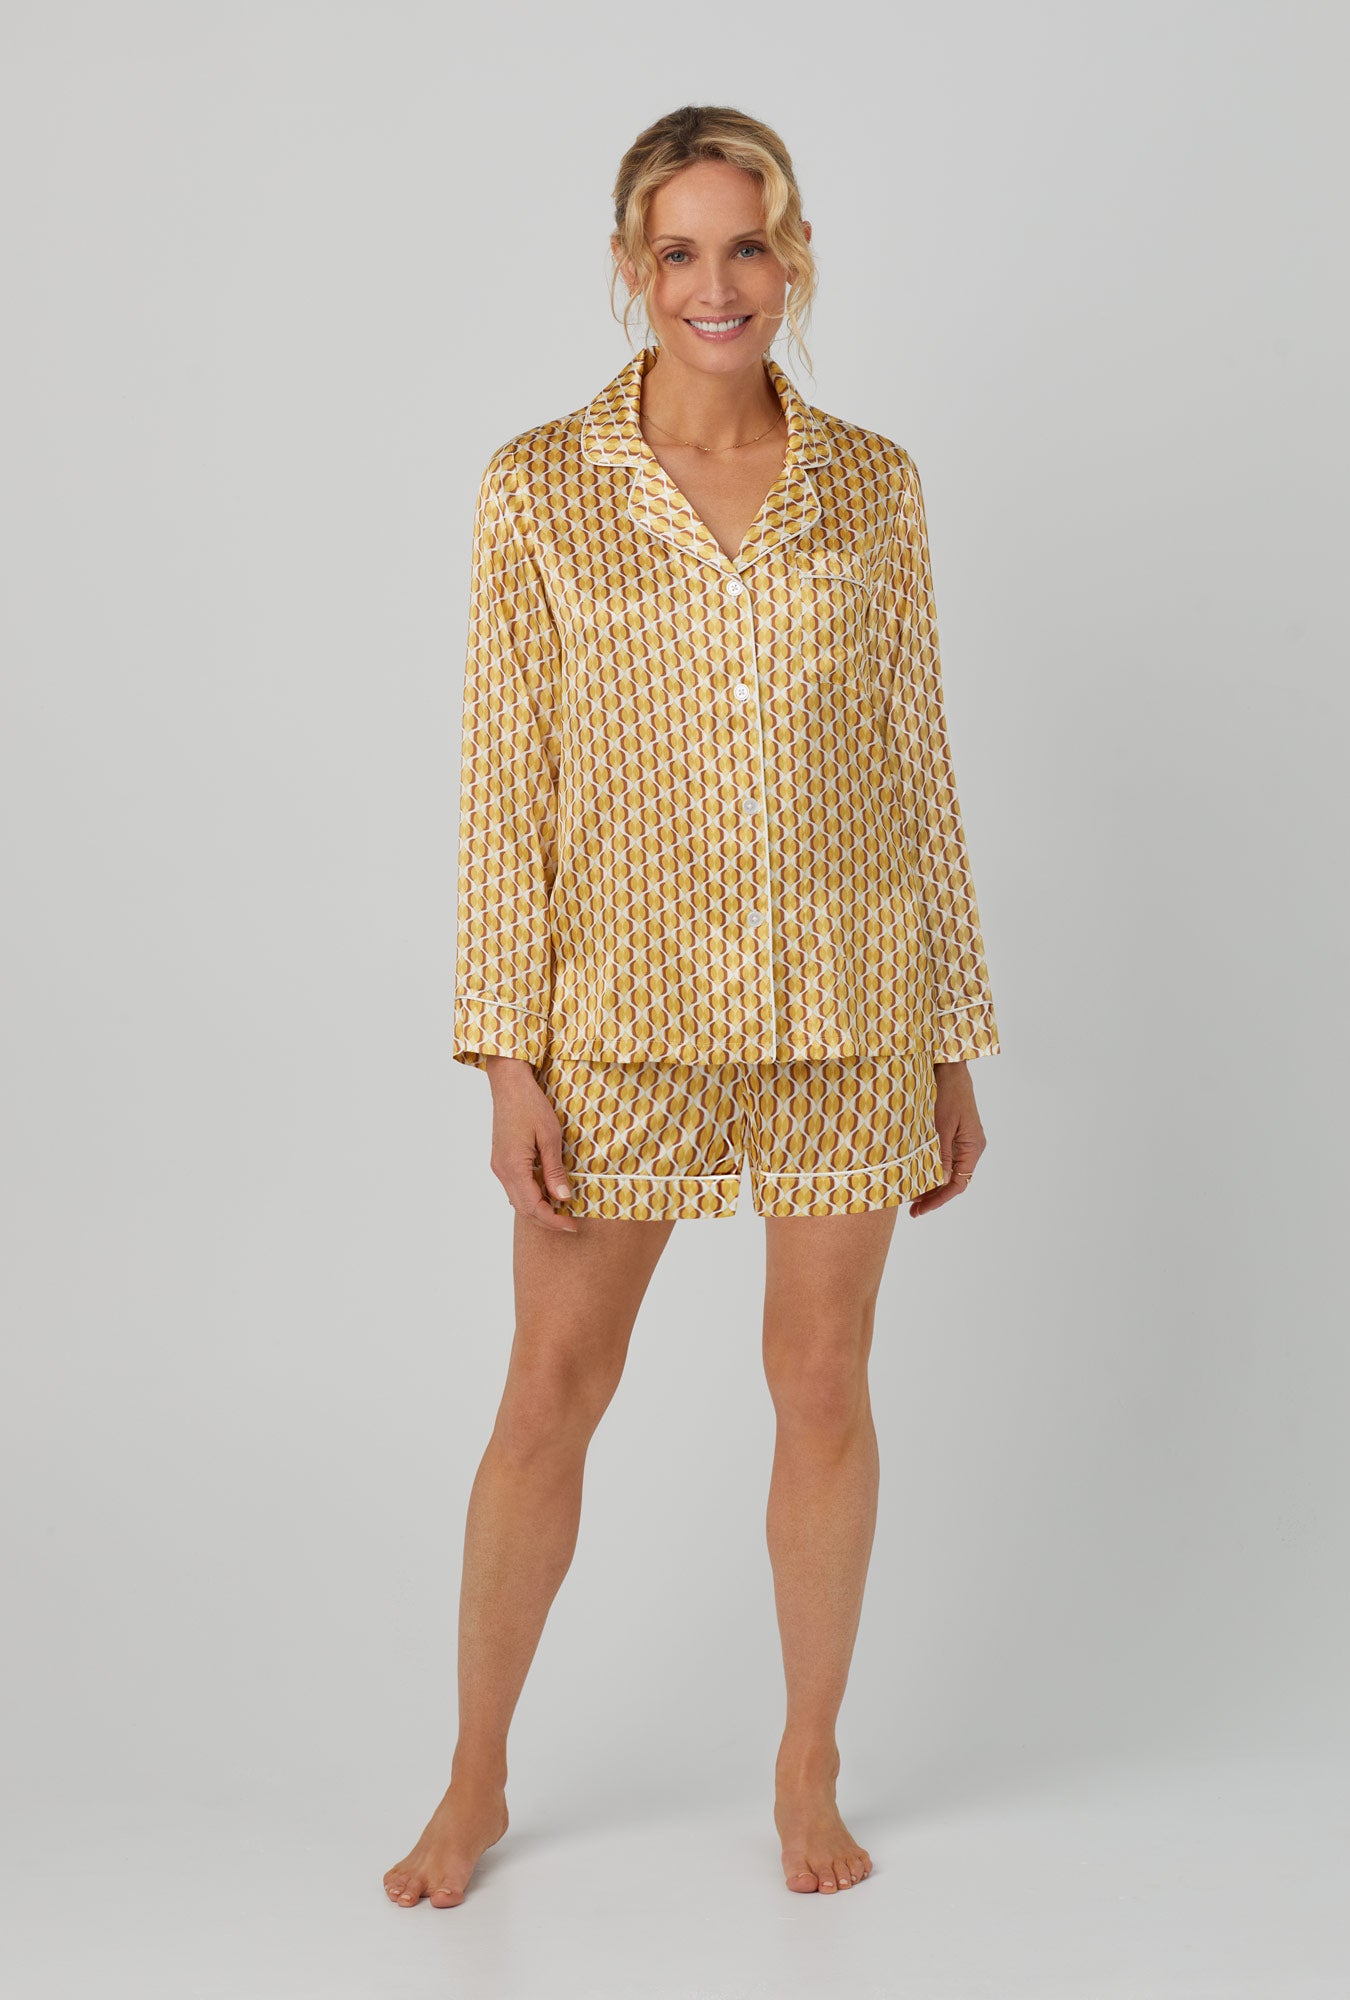 A lady wearing yellow Long Sleeve Classic Washable Silk Satin Shorty PJ Set with Prize Geo print